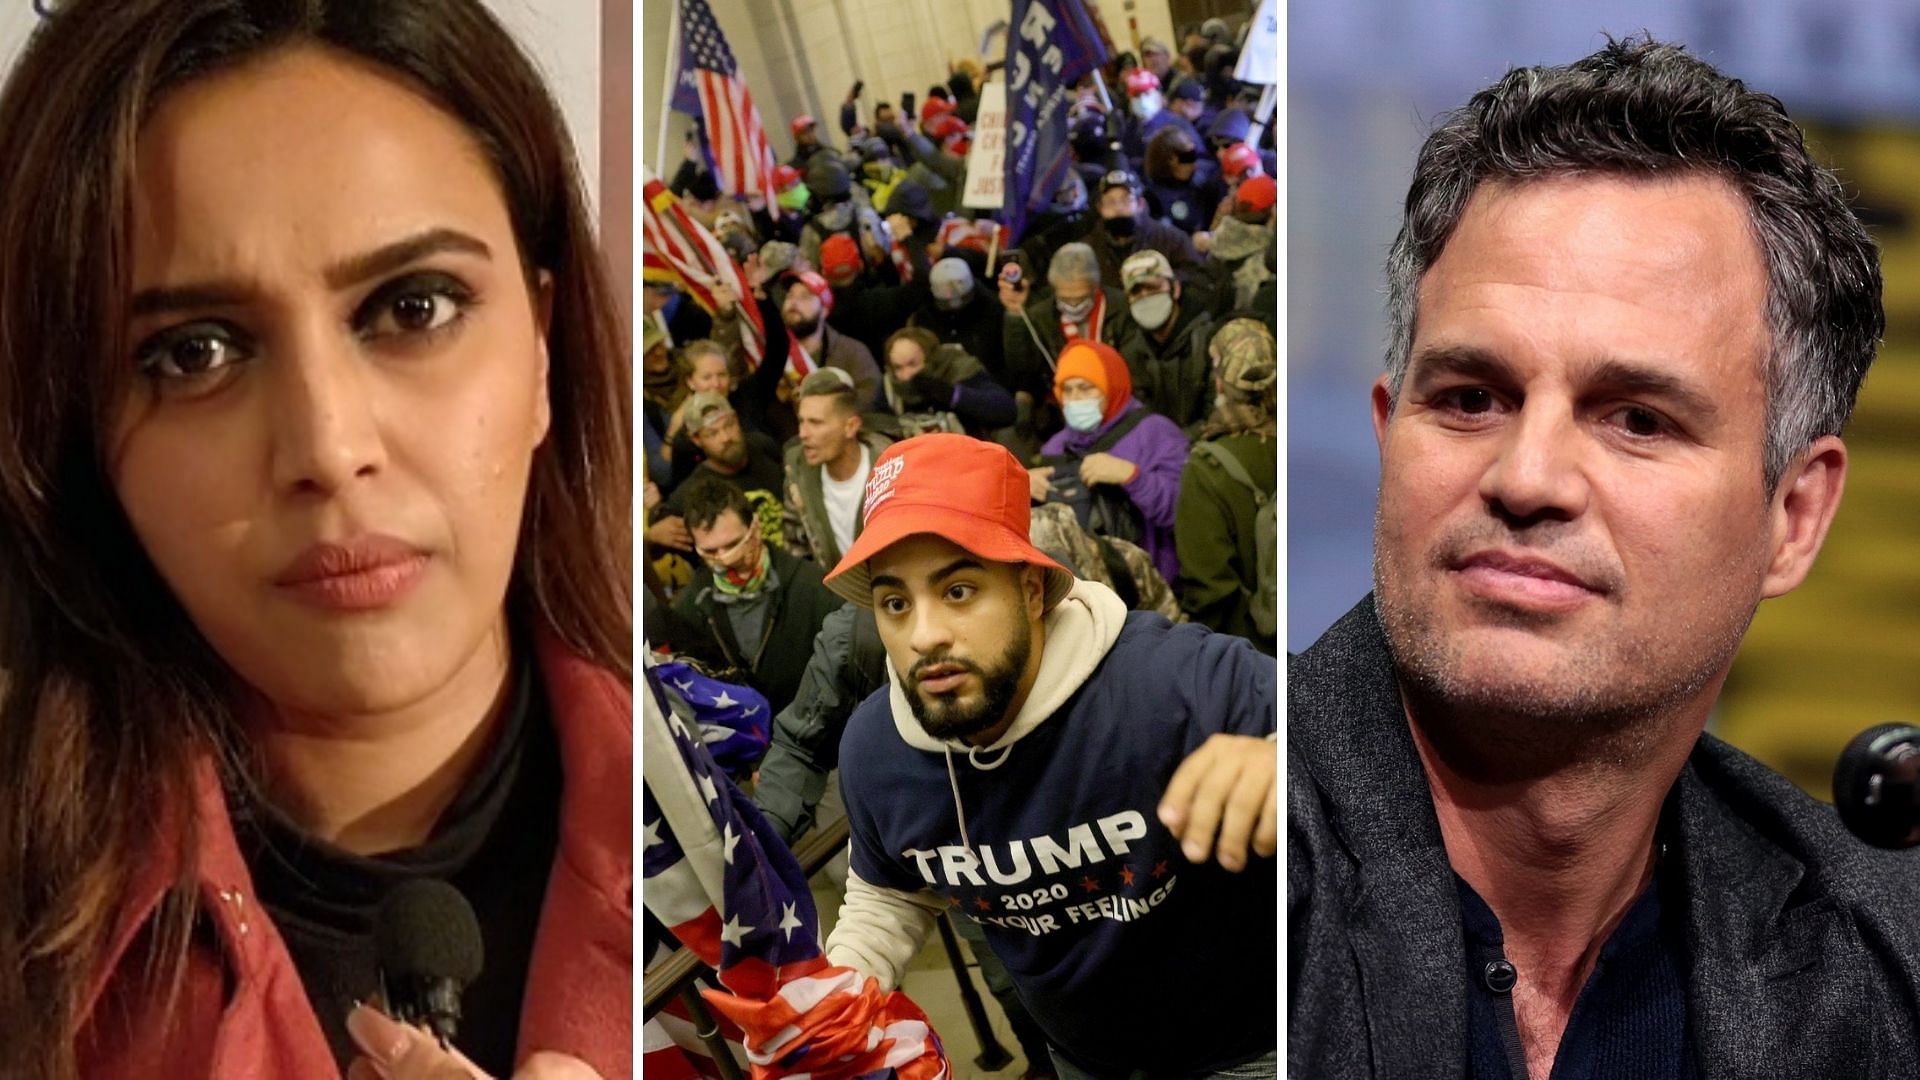 Swara Bhasker, Mark Ruffalo and other celebrities condemned the US Capitol violence.